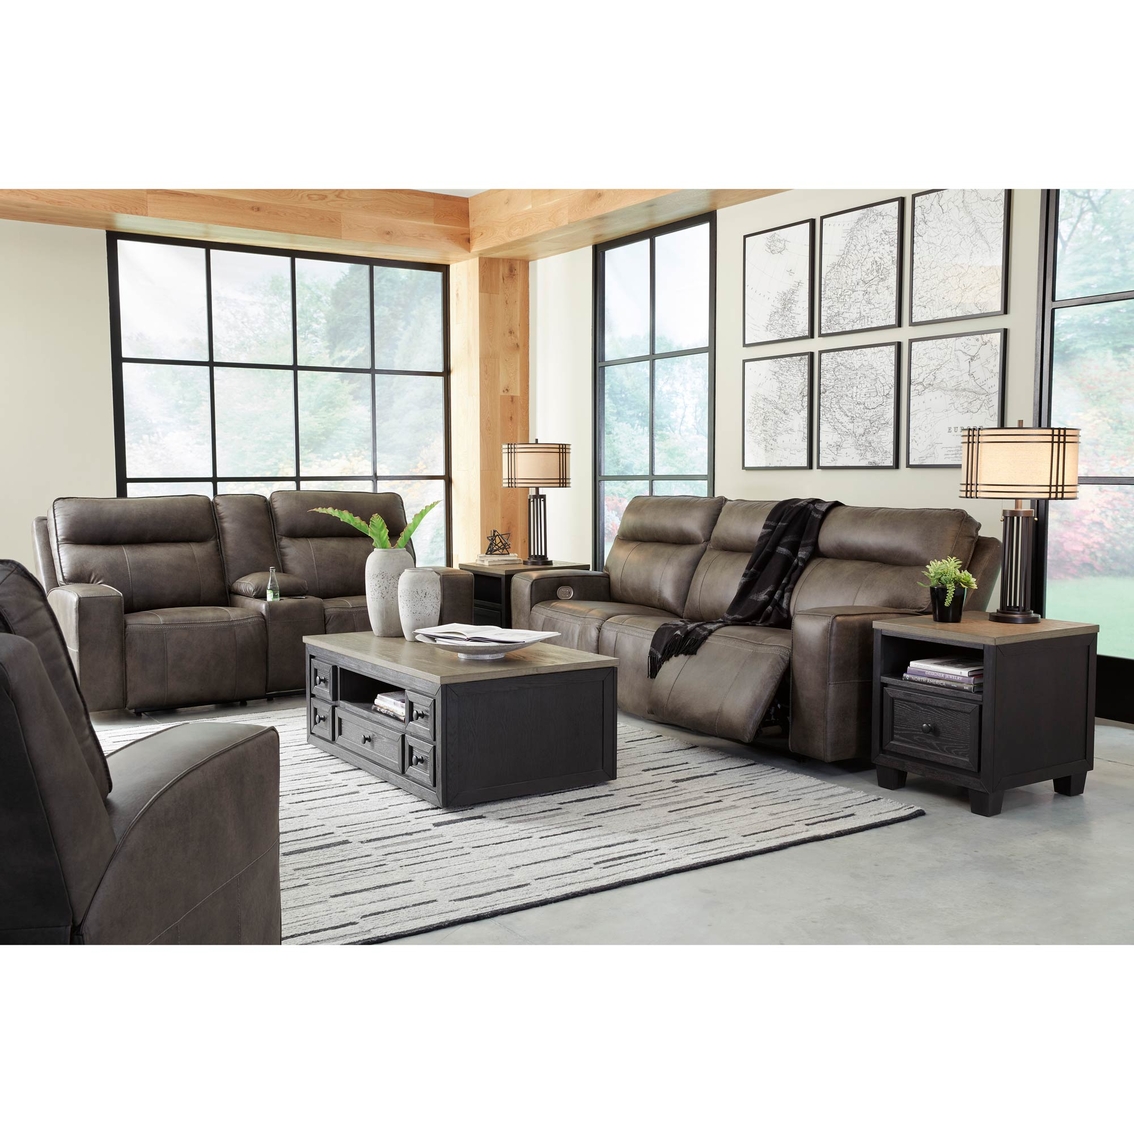 Signature Design by Ashley Game Plan Power Reclining Loveseat - Image 9 of 9